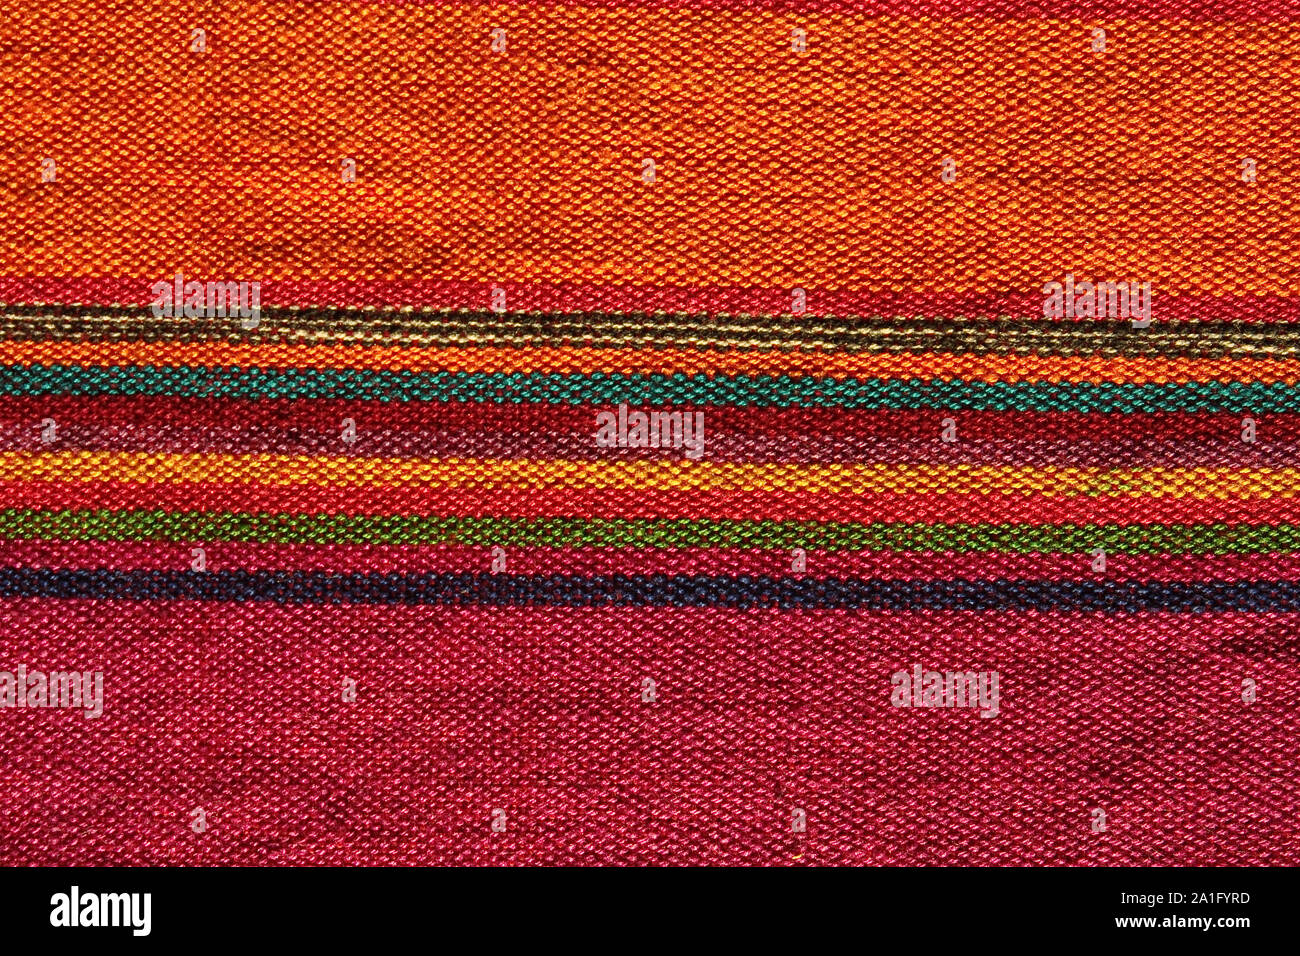 Oriental Rug (India) with floral motifs and colors (Orange, green, red, blue)... colorful Indian textile. Stock Photo